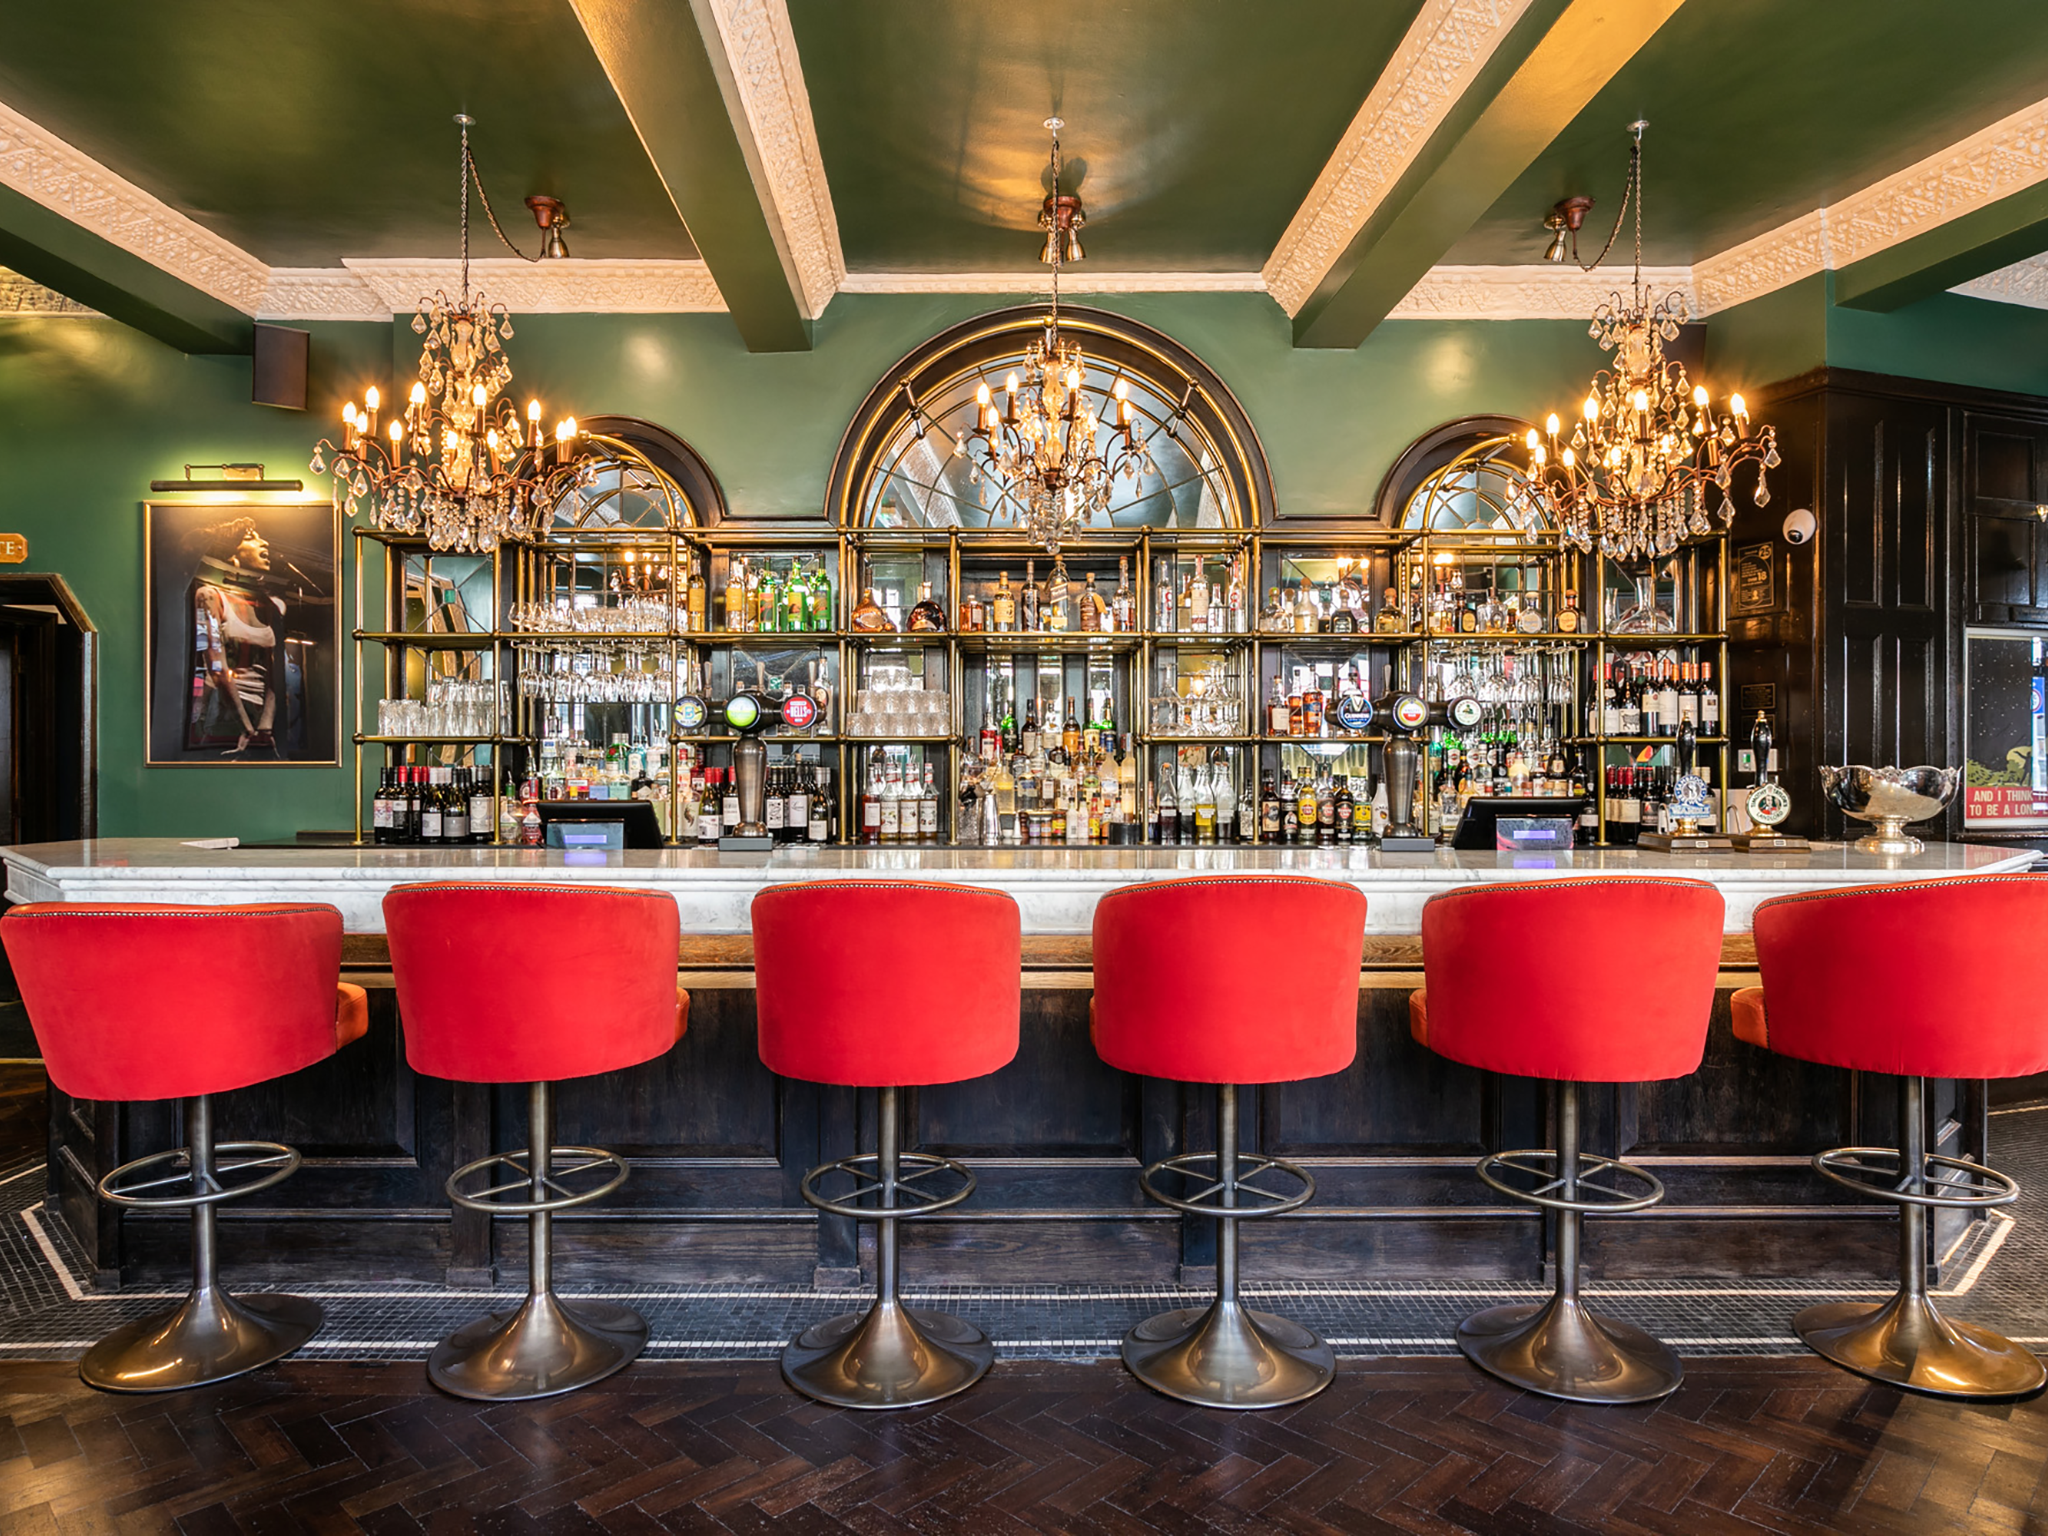 The Bedford has not just one, but five bars ready to serve all your drinking needs